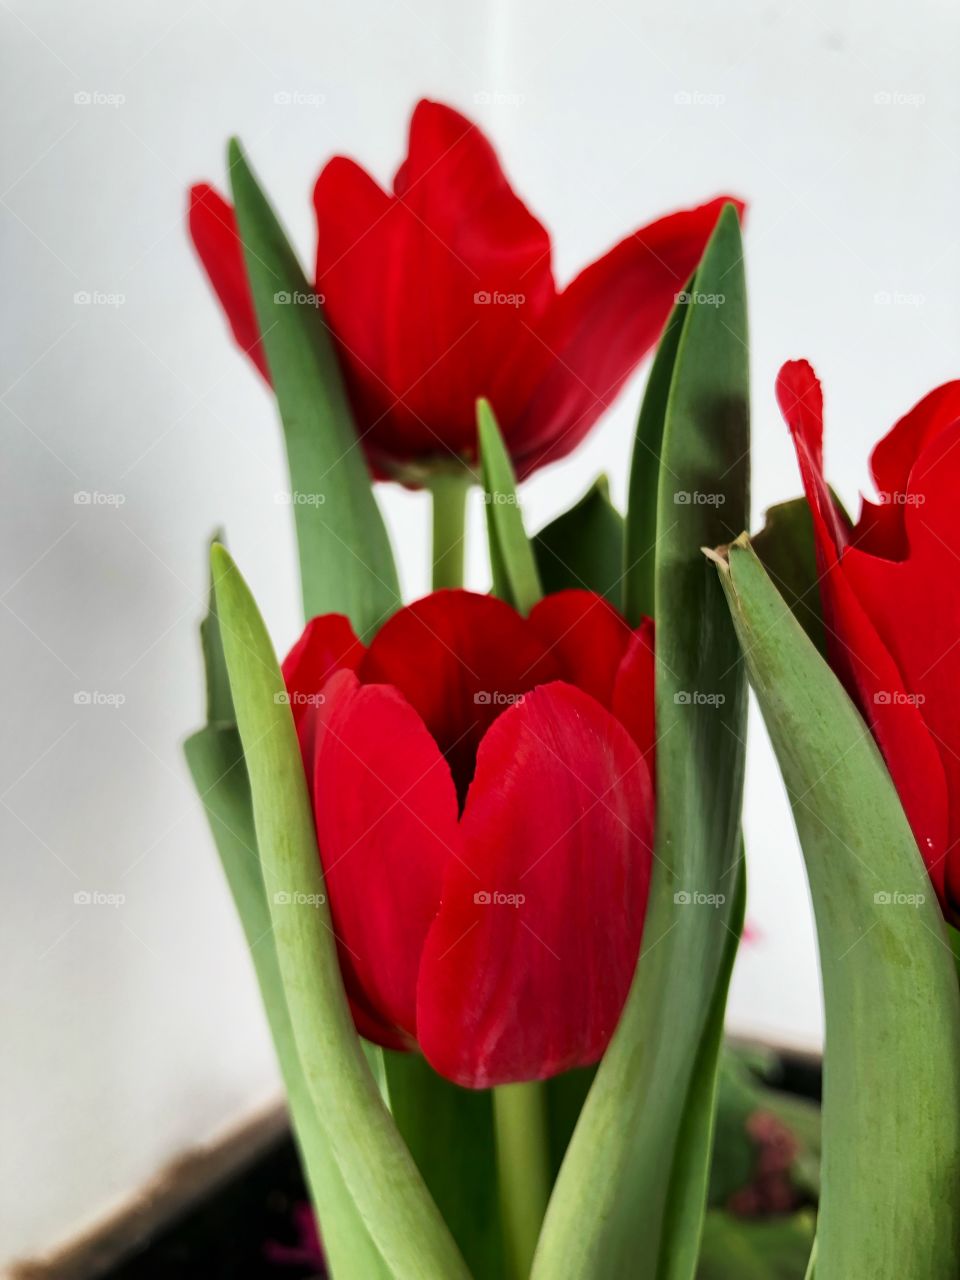 Tulips. Beautiful and Delicate flowers. Red Tulips mean true and eternal love. Romance is in the air...